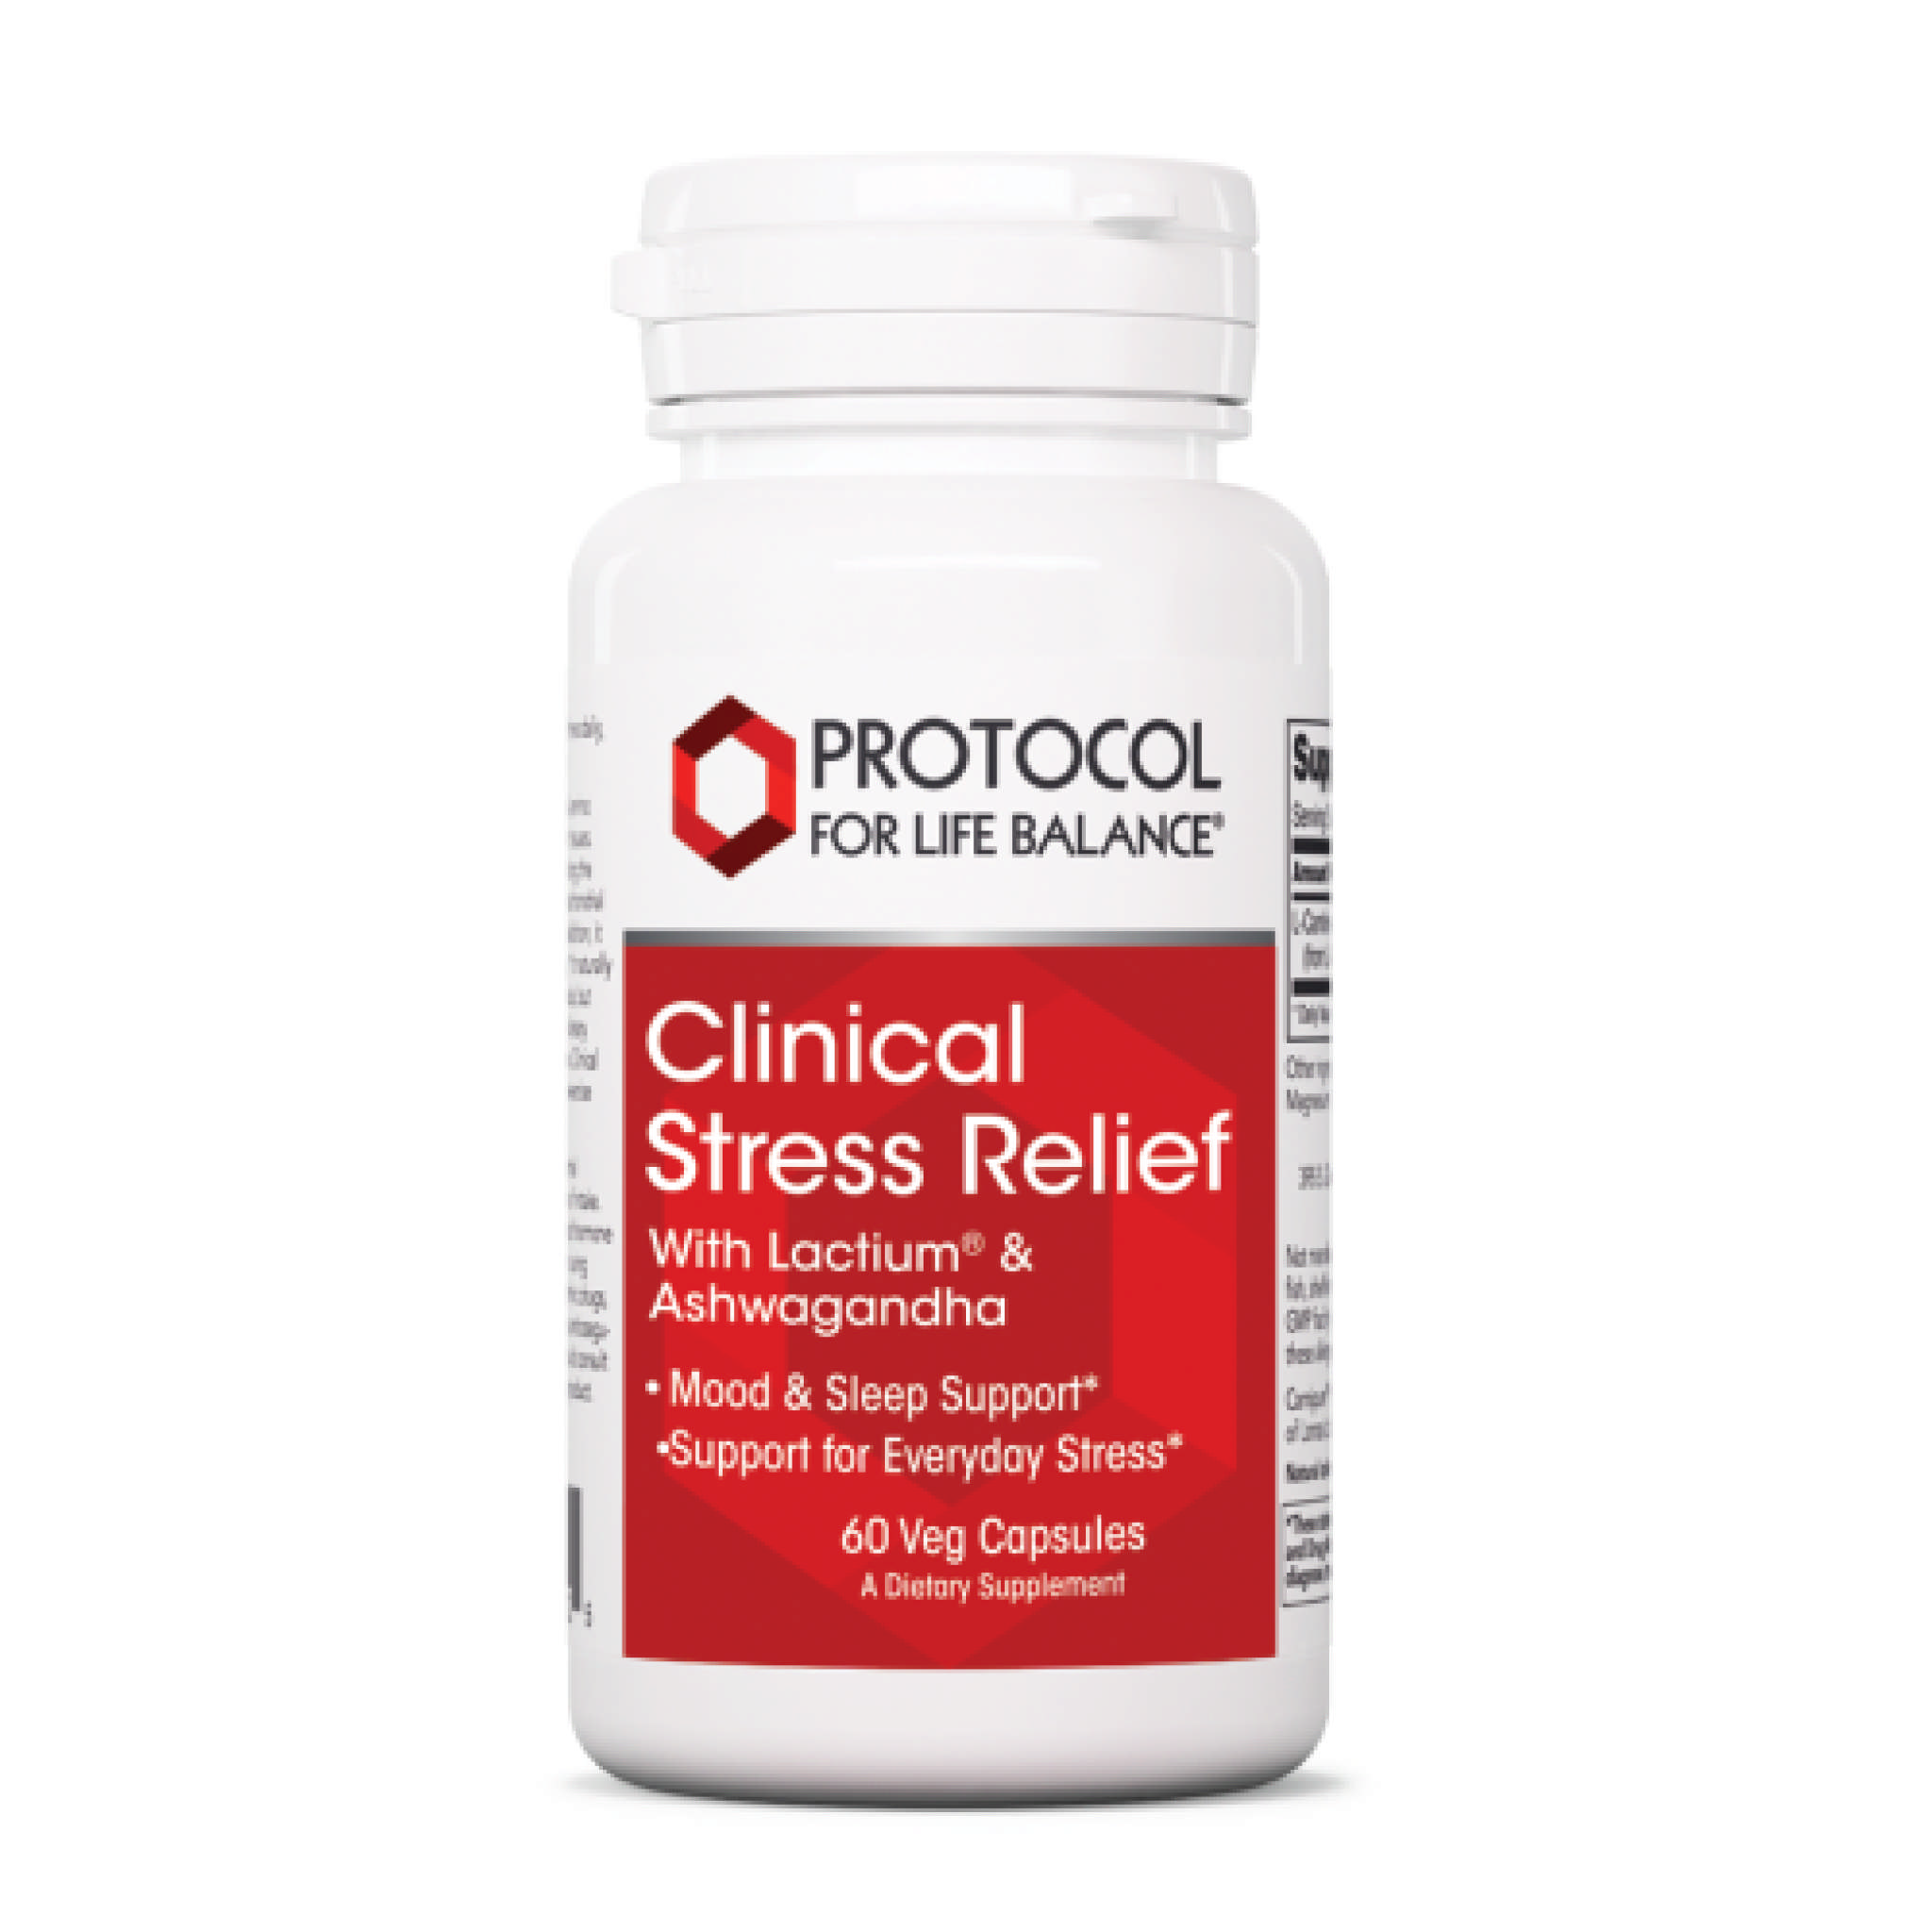 Protocol For Life Balance - Clinical Stress Relief vCap